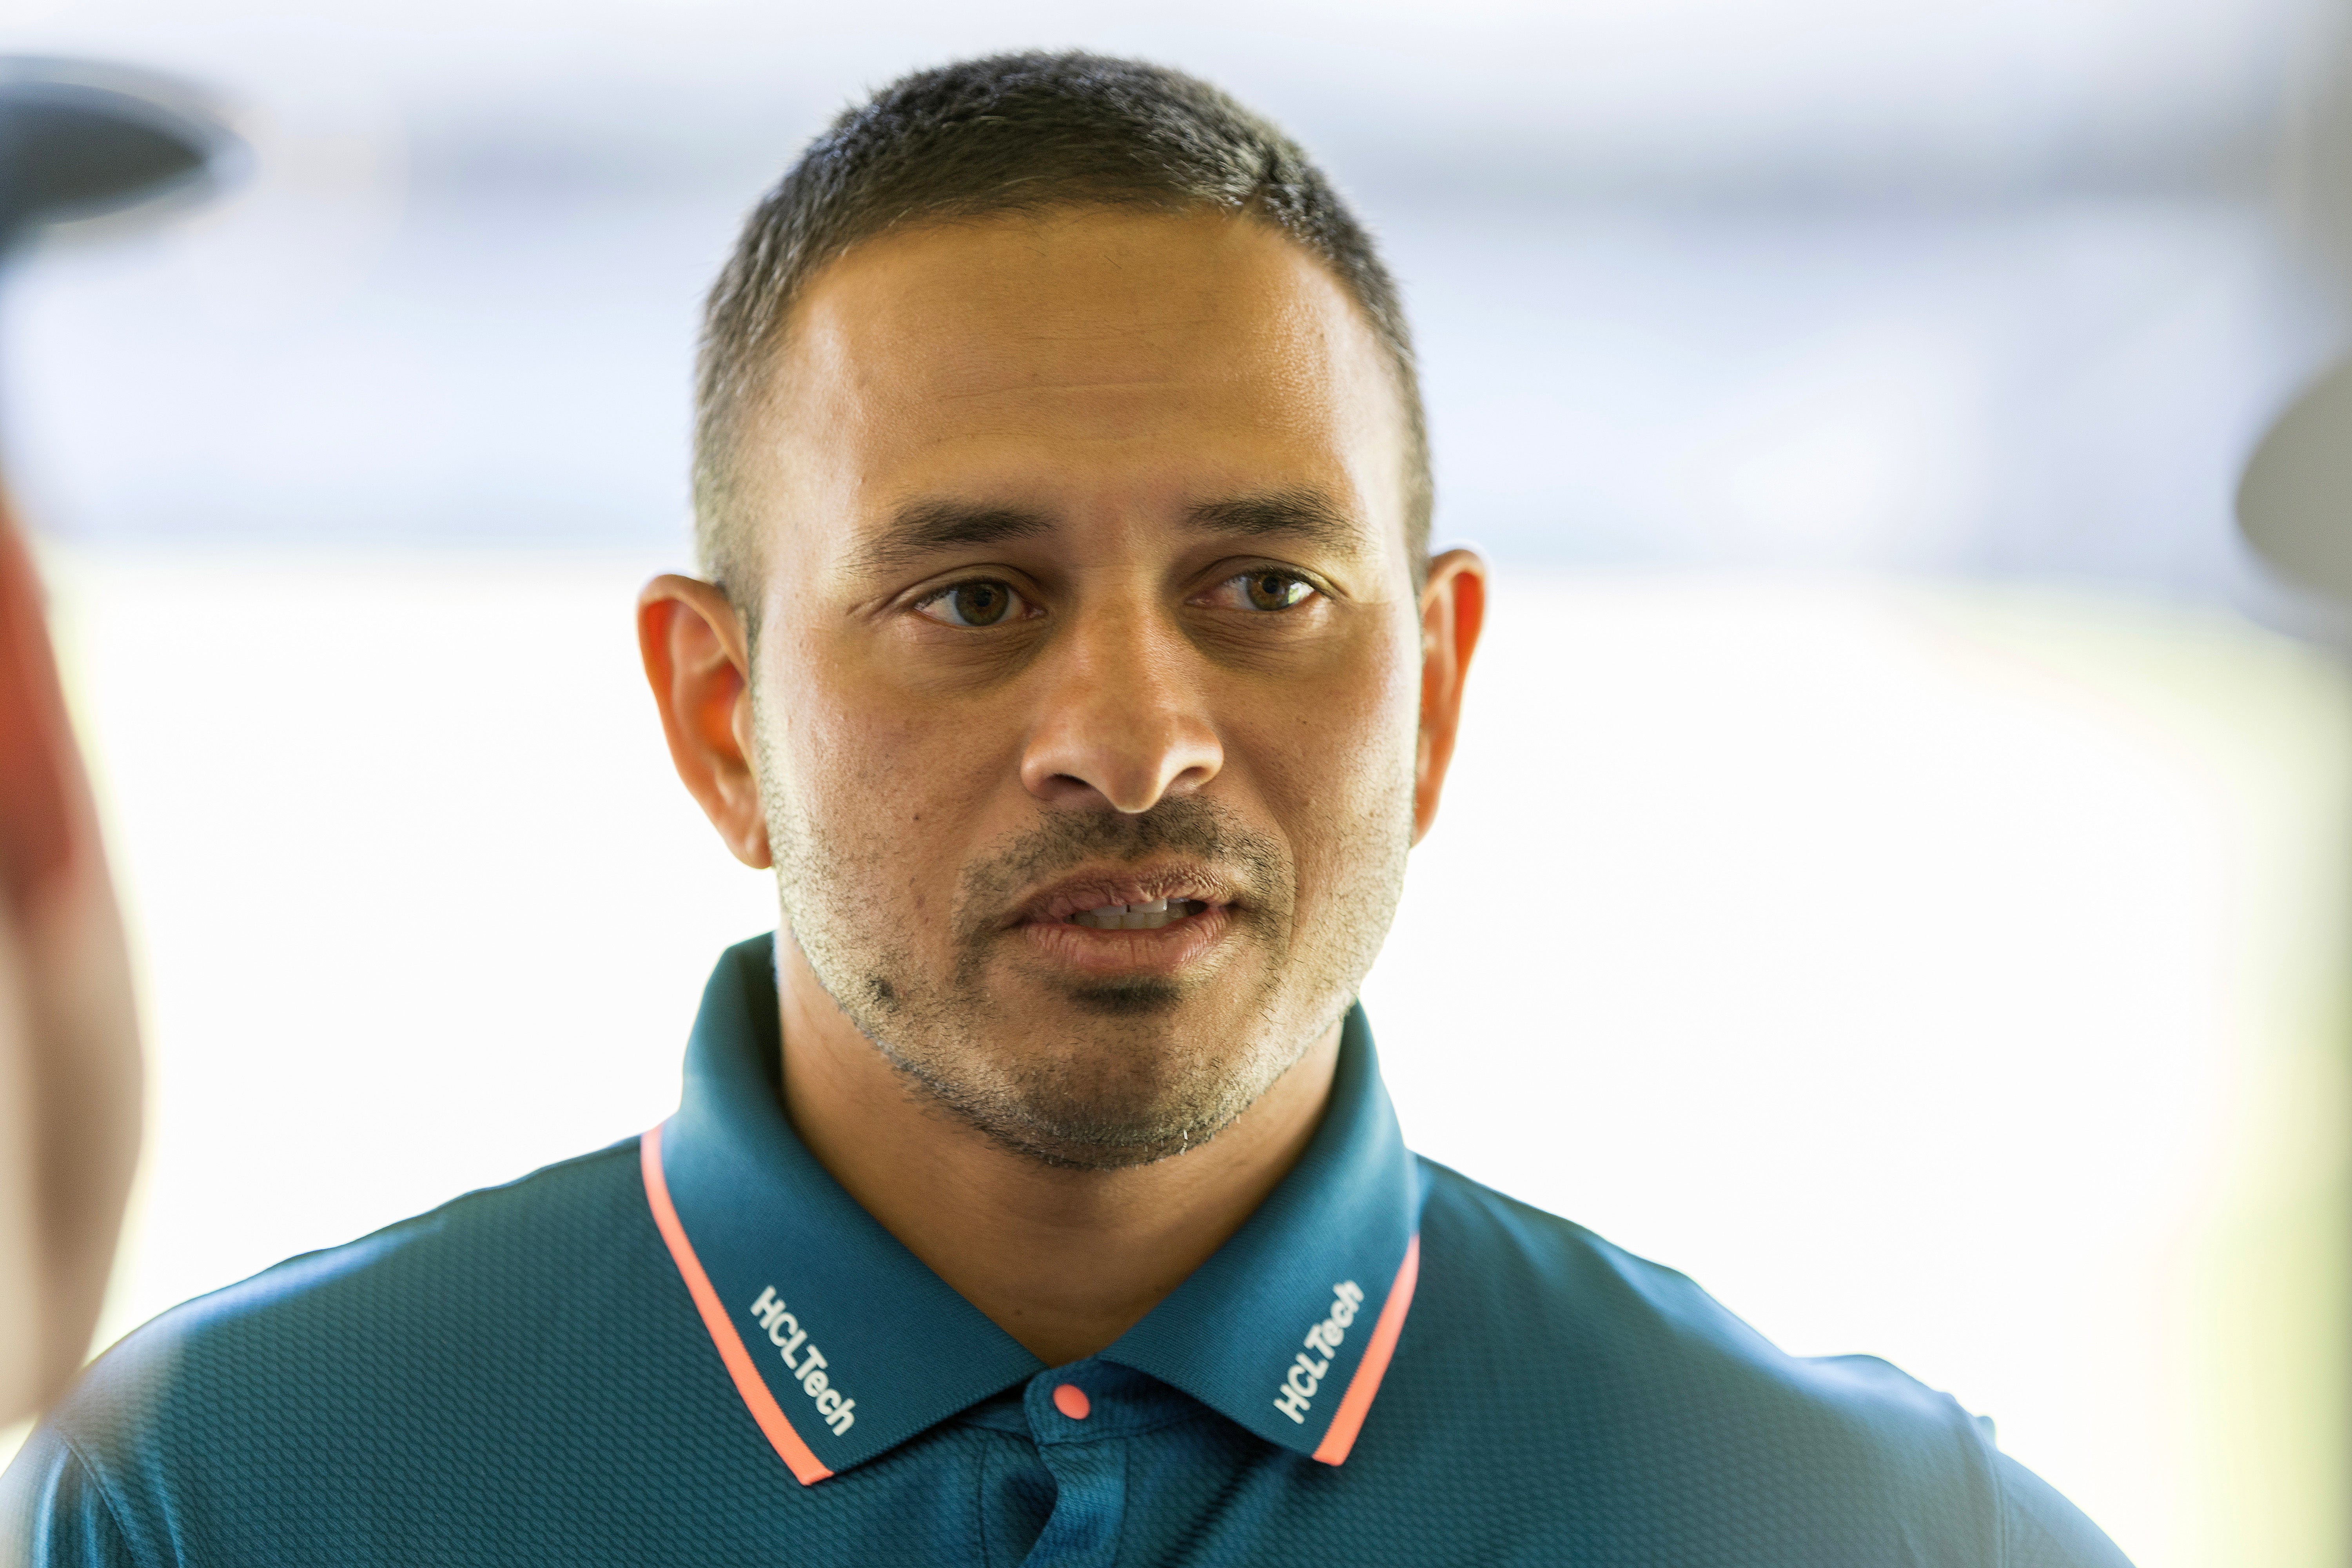 Usman Khawaja explained his appeal in a video statement